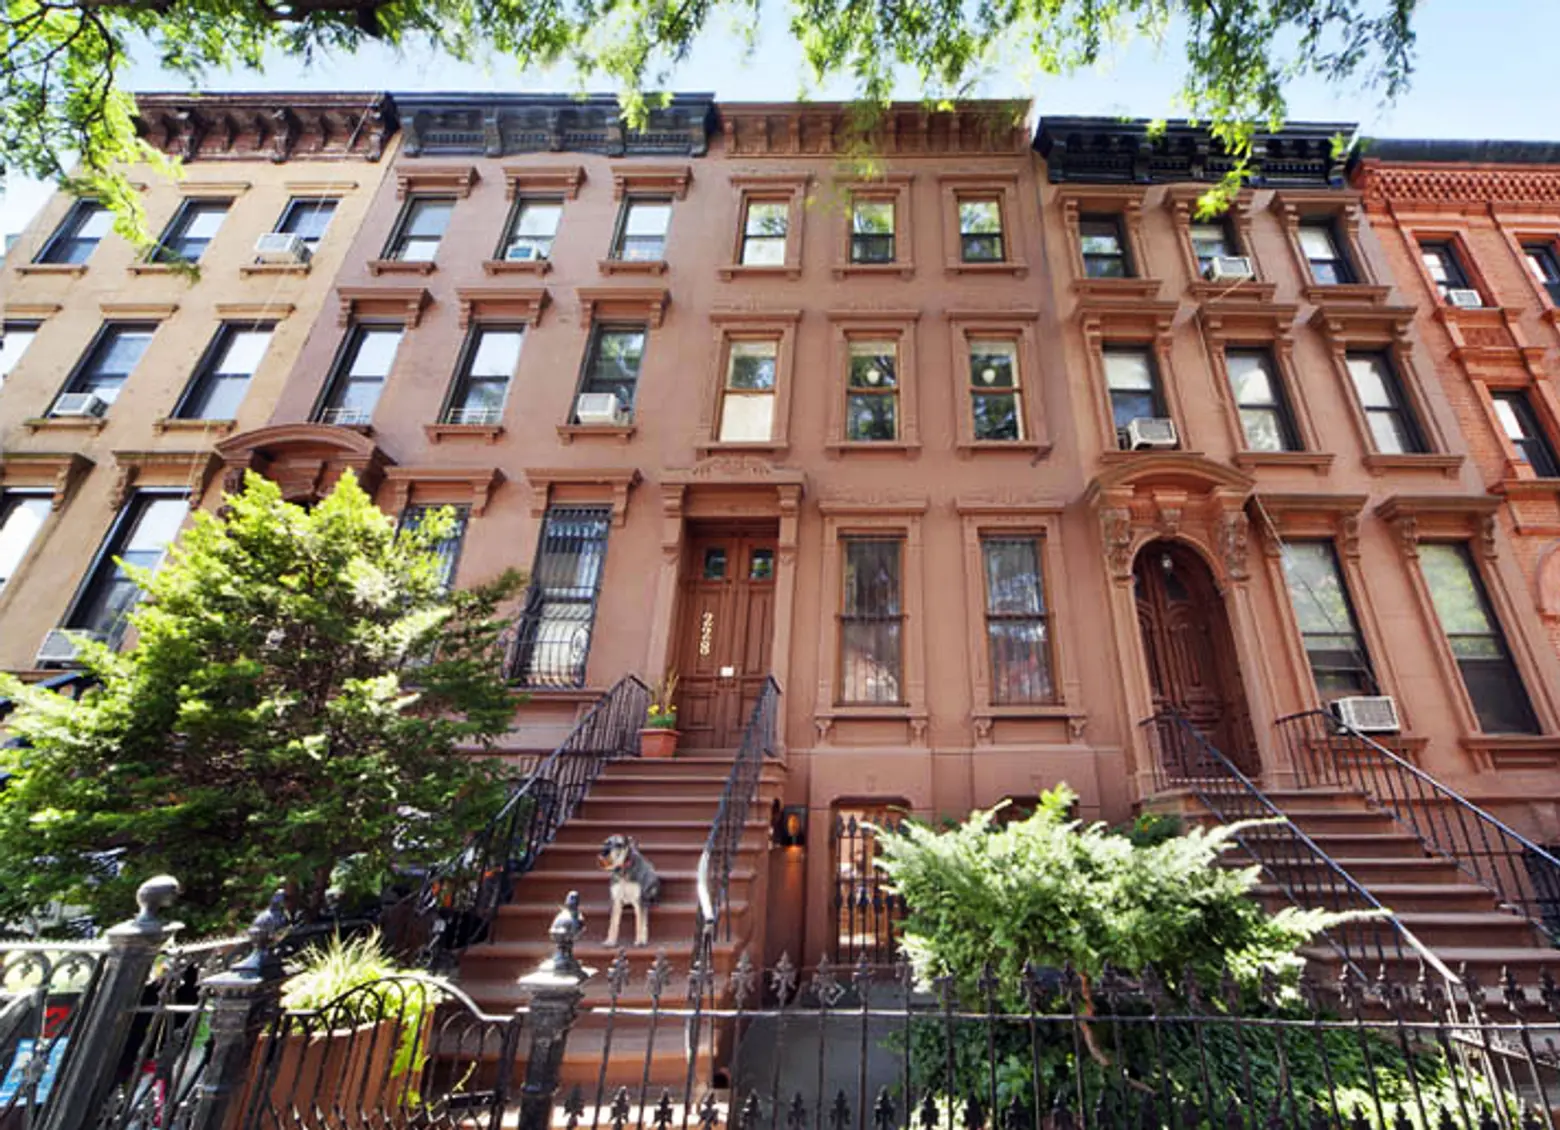 Brooklyn Home Prices Set Record, Manhattan Rents So High Studios Command $2,431/Month